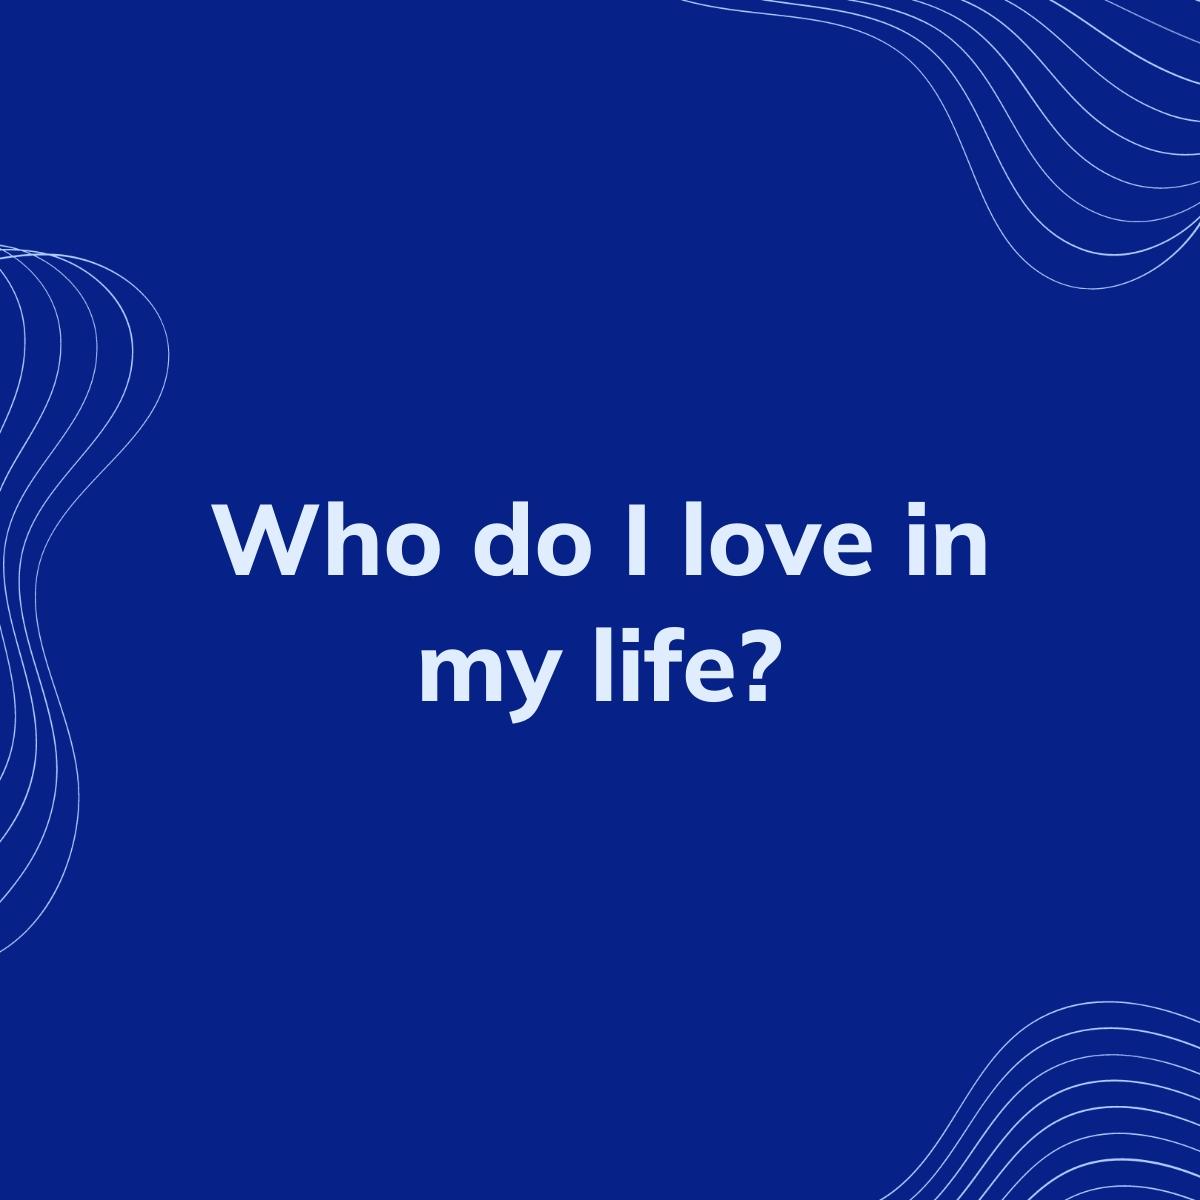 Journal Prompt: Who do I love in my life?